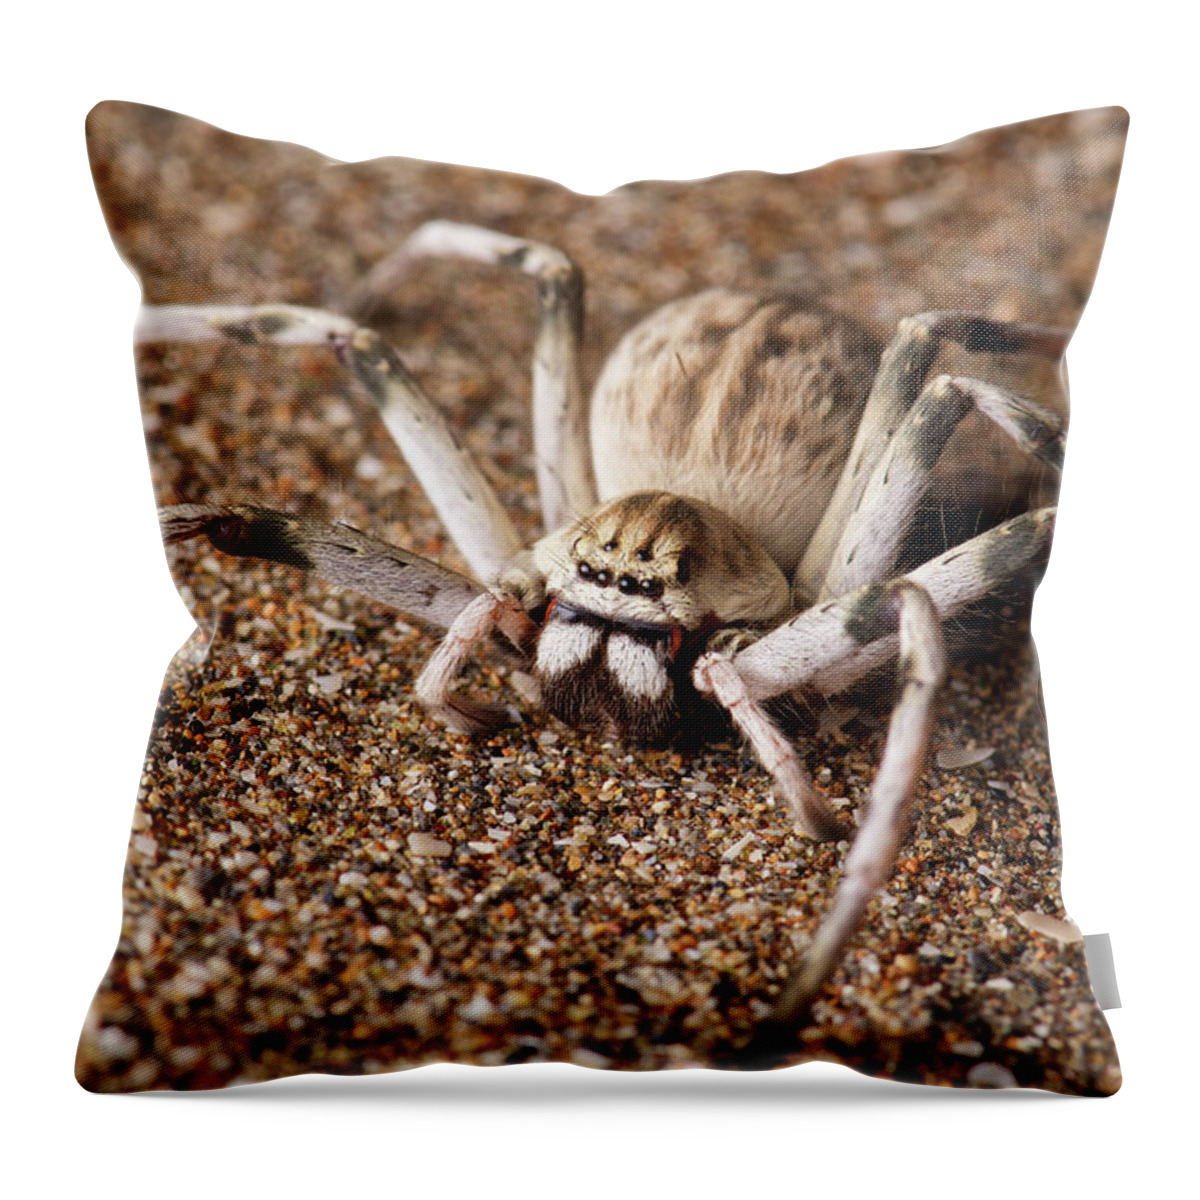 Disk1250 Throw Pillow featuring the photograph Huntsman Spider by James Christensen